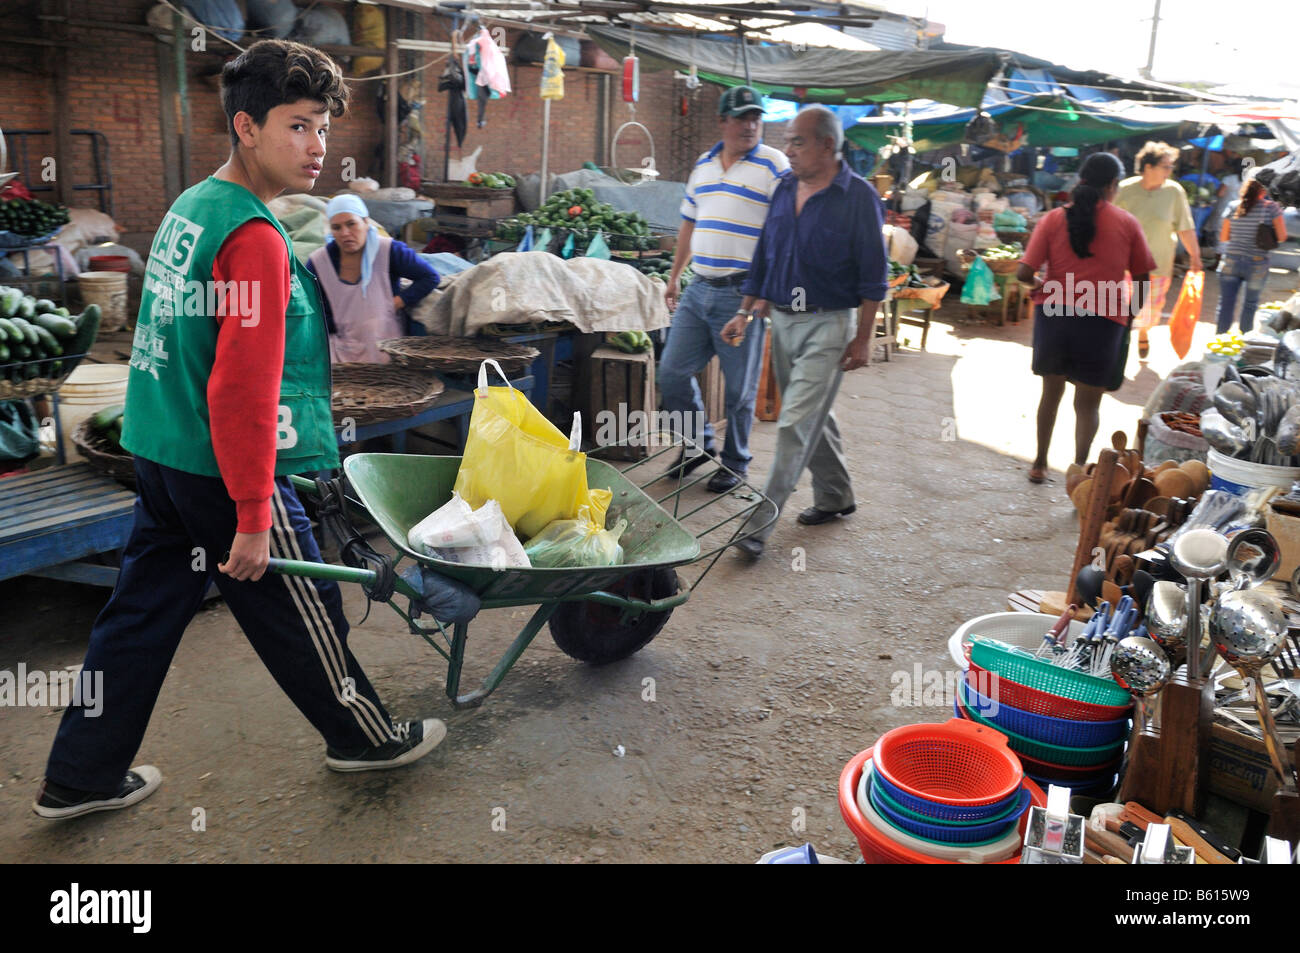 Child labour, boy transporting customers' purchases using a wheel barrow at the local market, Santa Cruz, Bolivia, South America Stock Photo